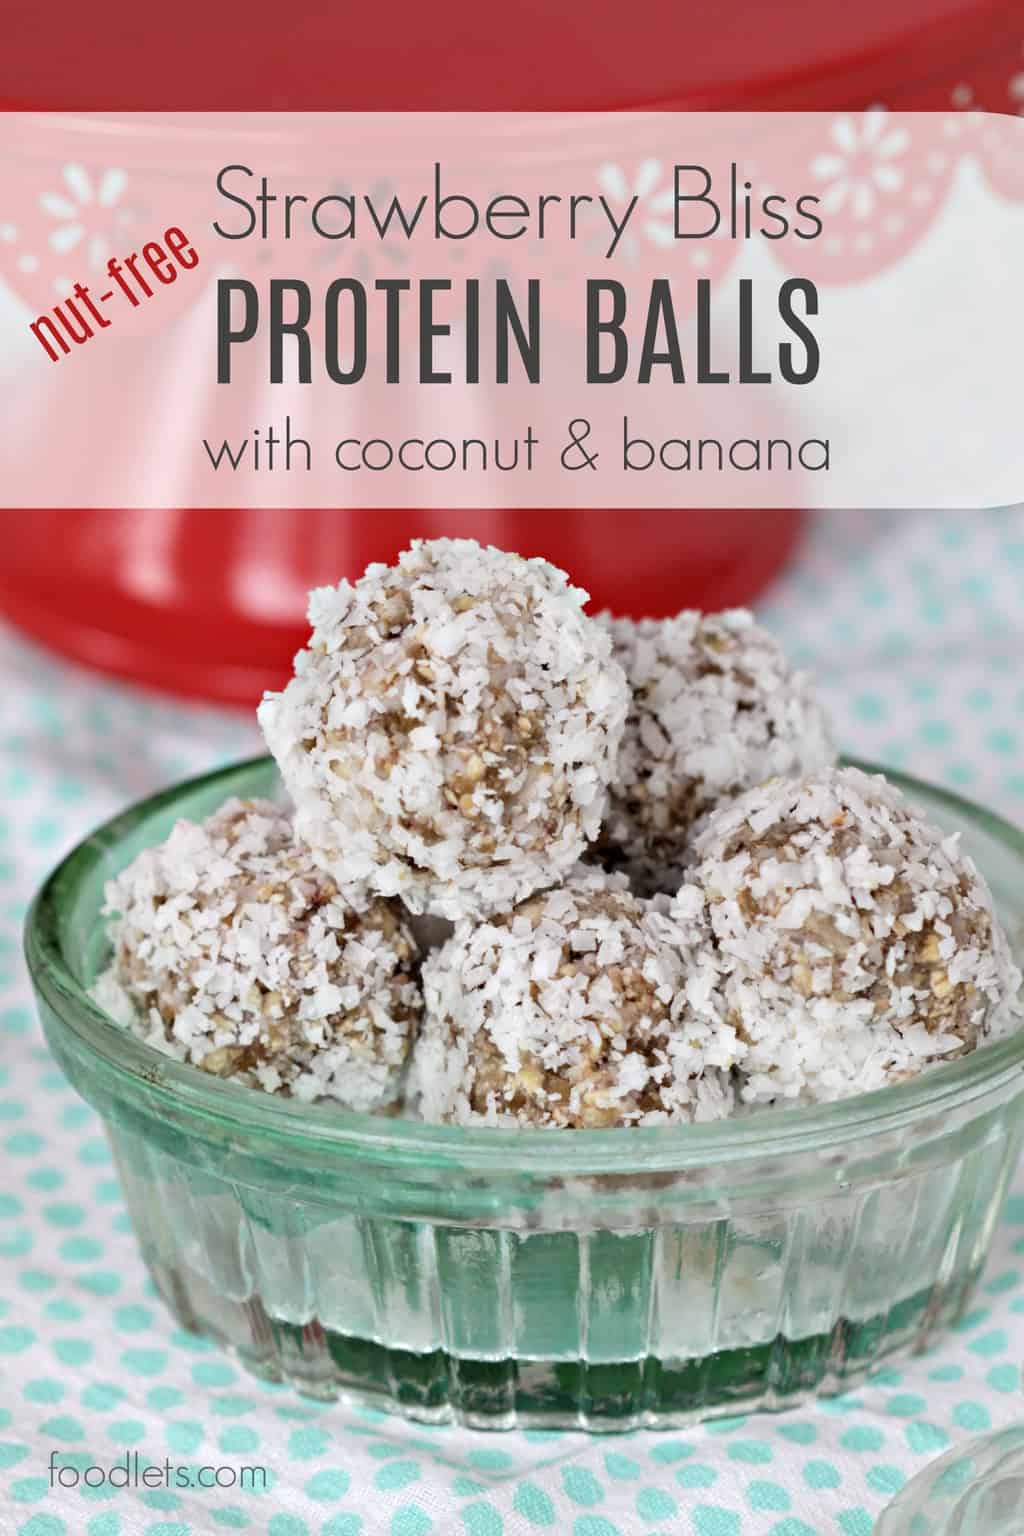 strawberry-bliss-protein-balls-foodlets